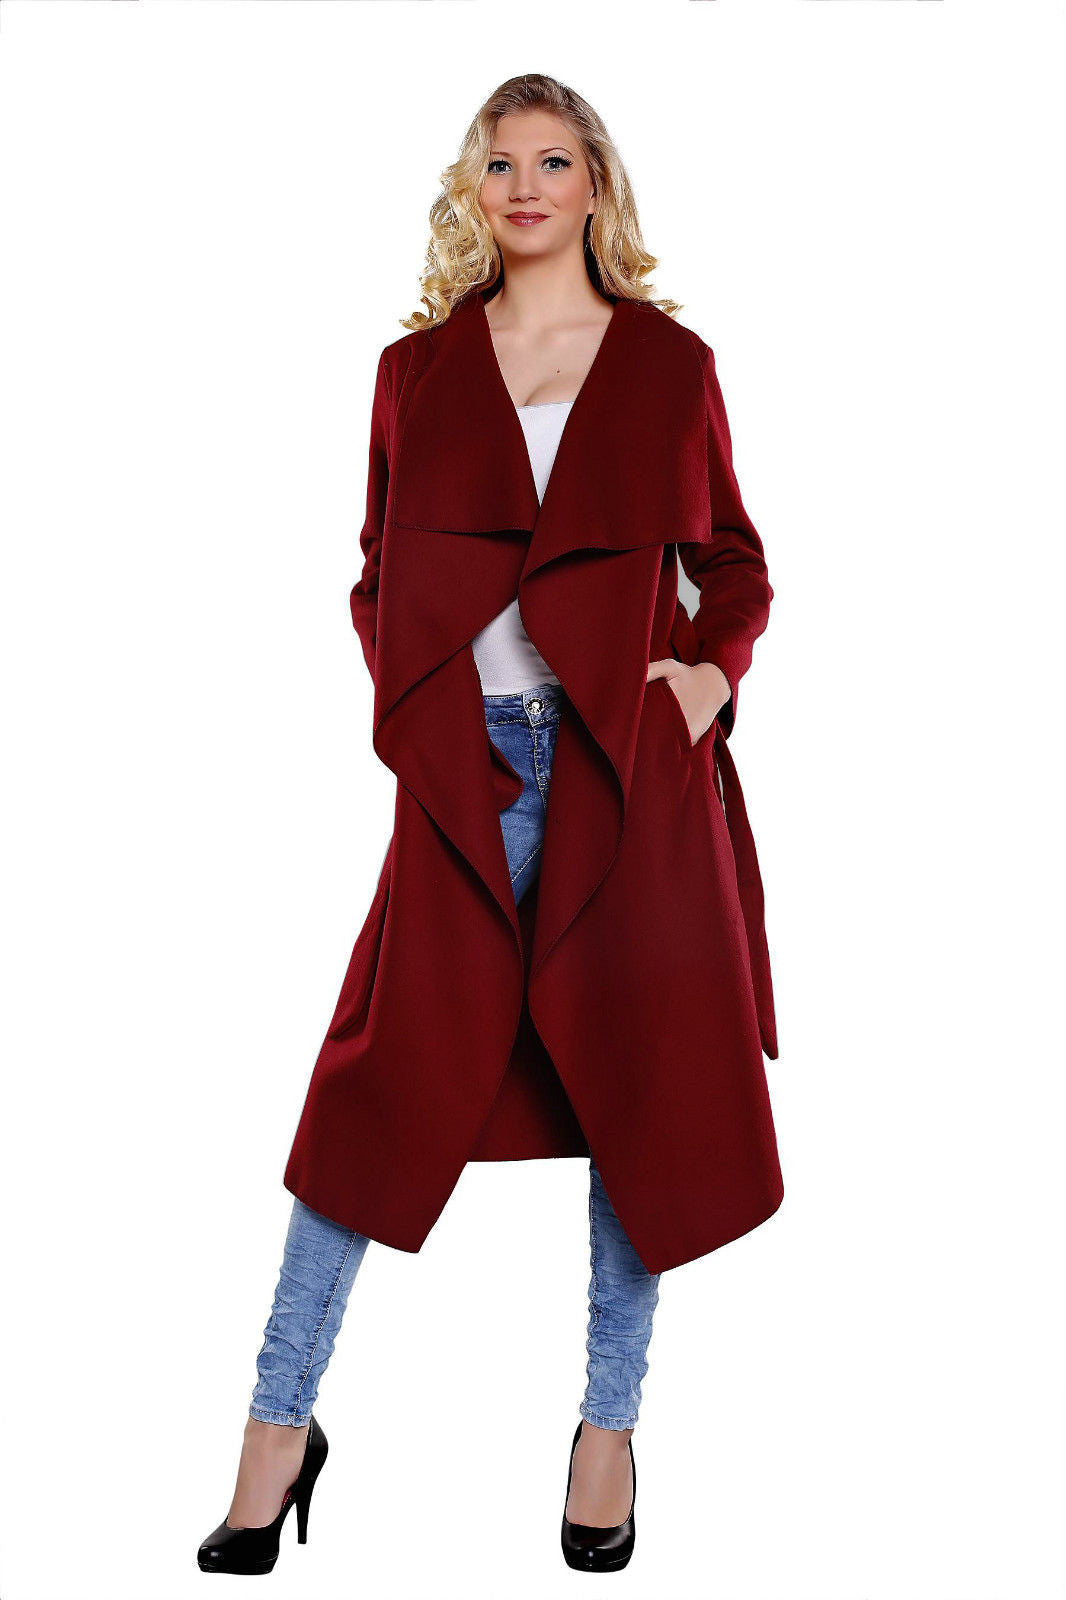 spring fashion Casual women's wool blend Trench Coat long Outerwear loose clothes for lady good-Dollar Bargains Online Shopping Australia